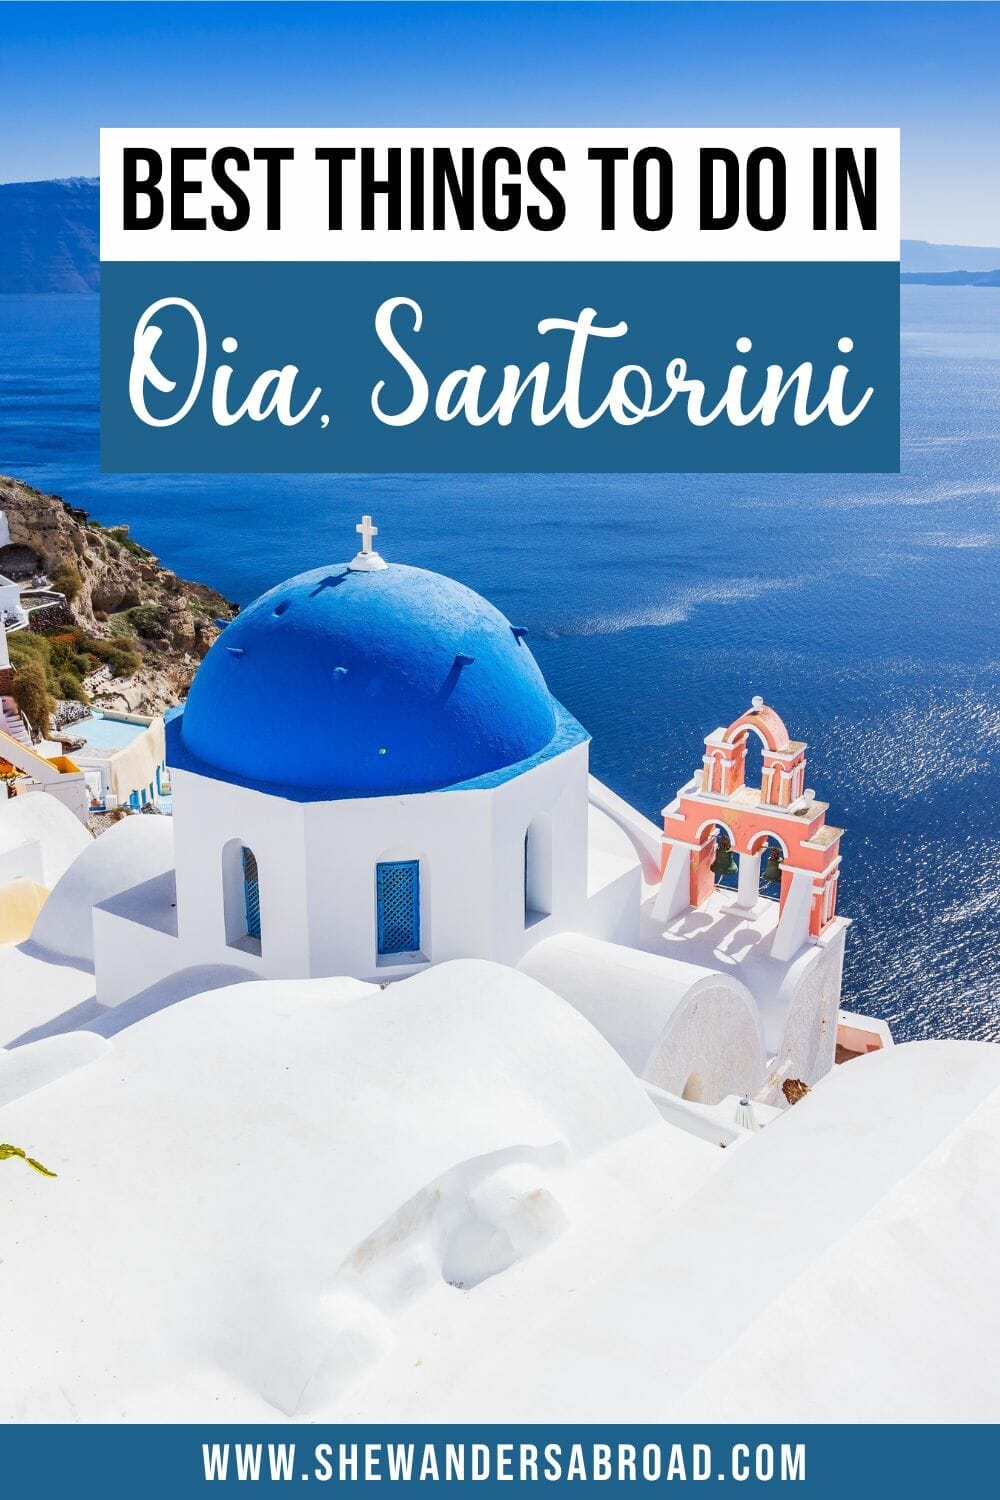 Best Things to Do in Oia Santorini